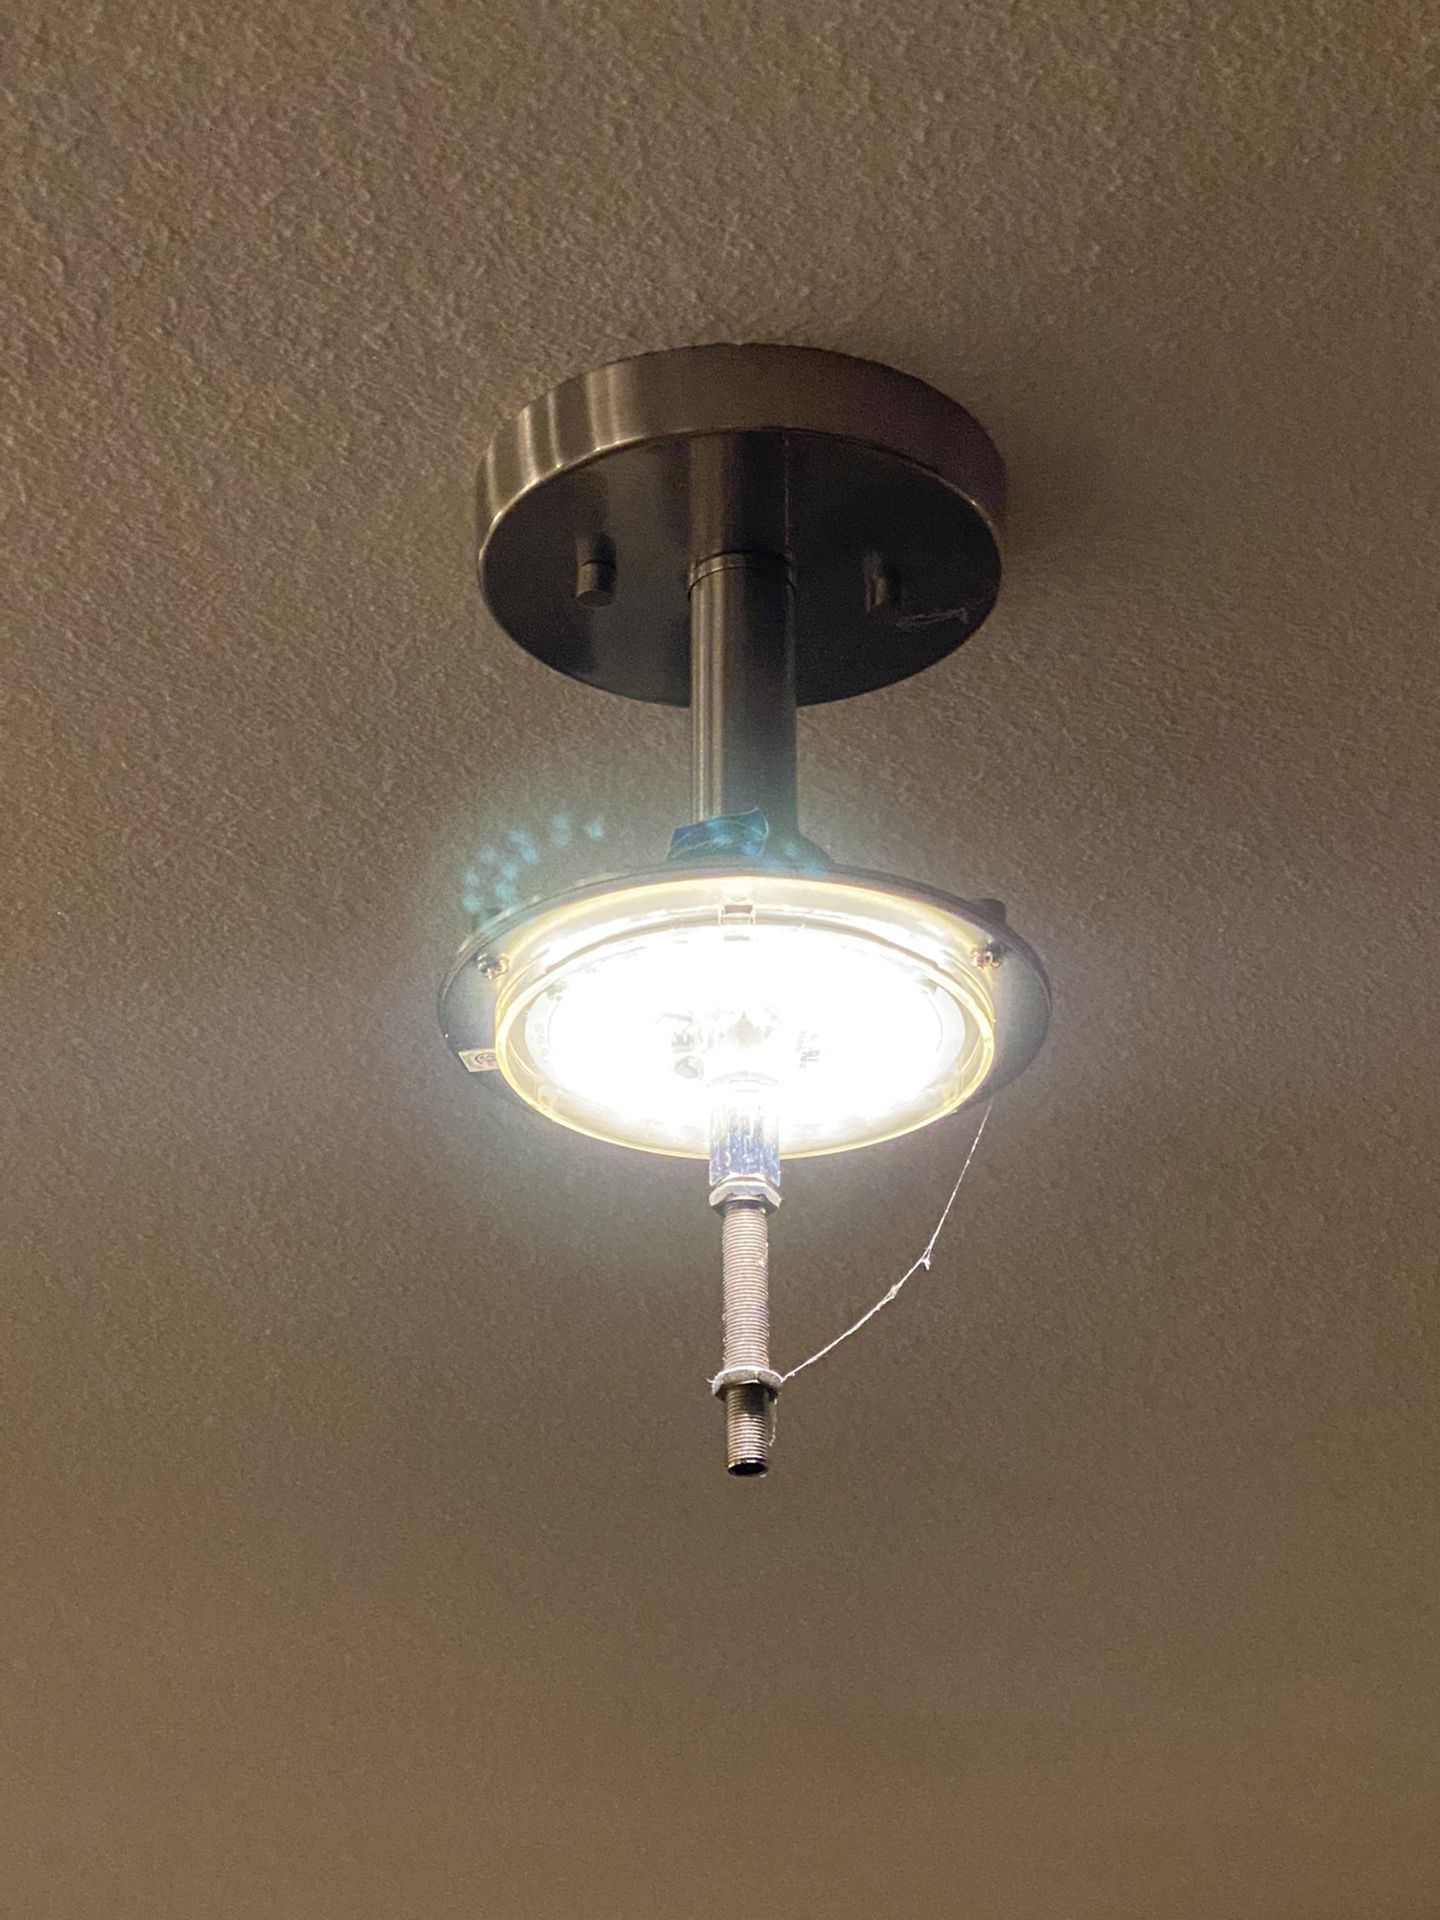 Close Encounters of the third kind - light fixture